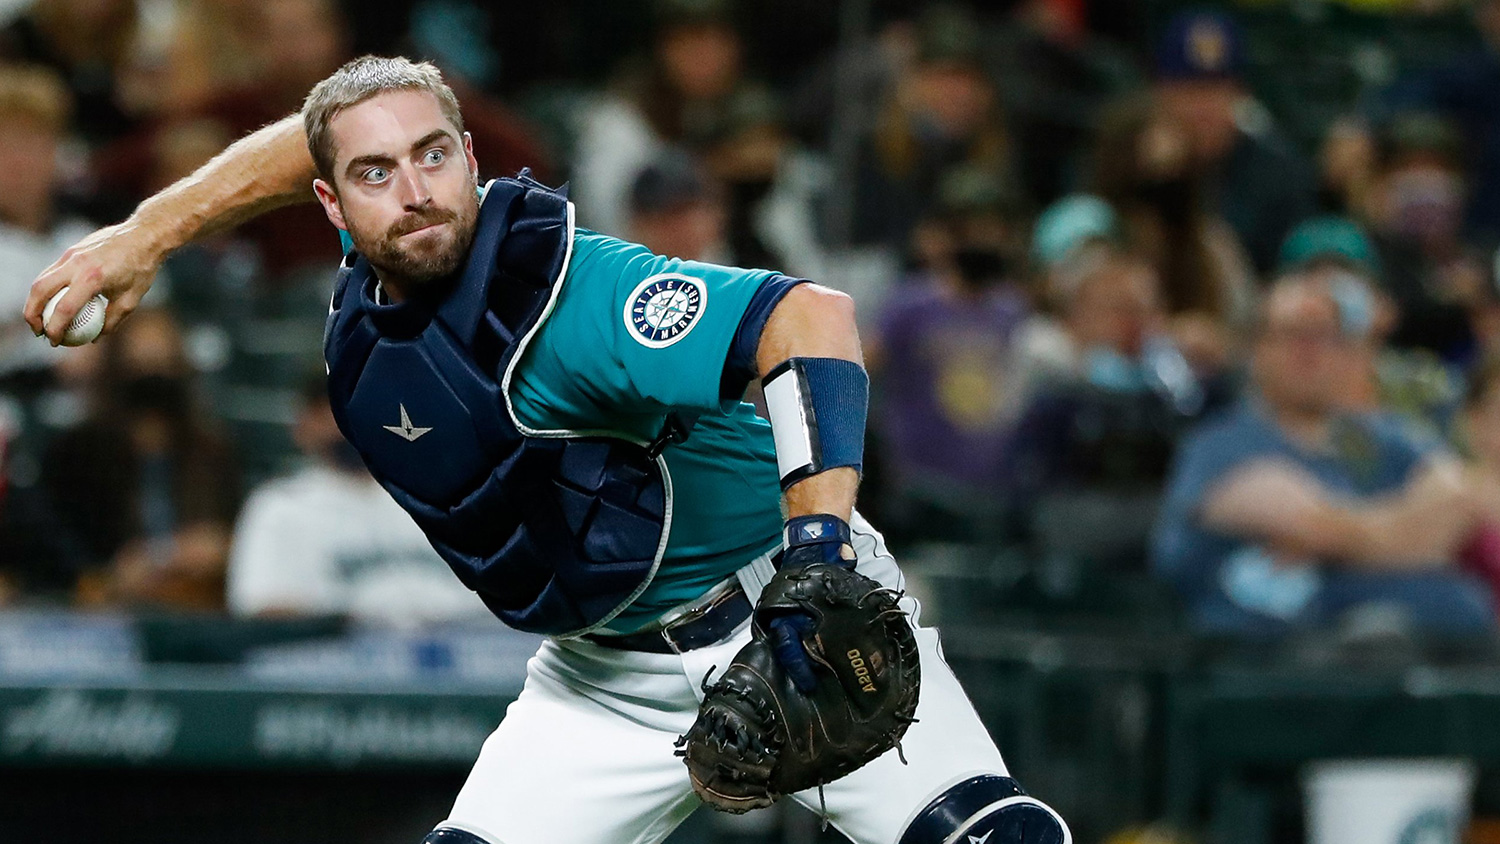 Get to know the 2022 Mariners